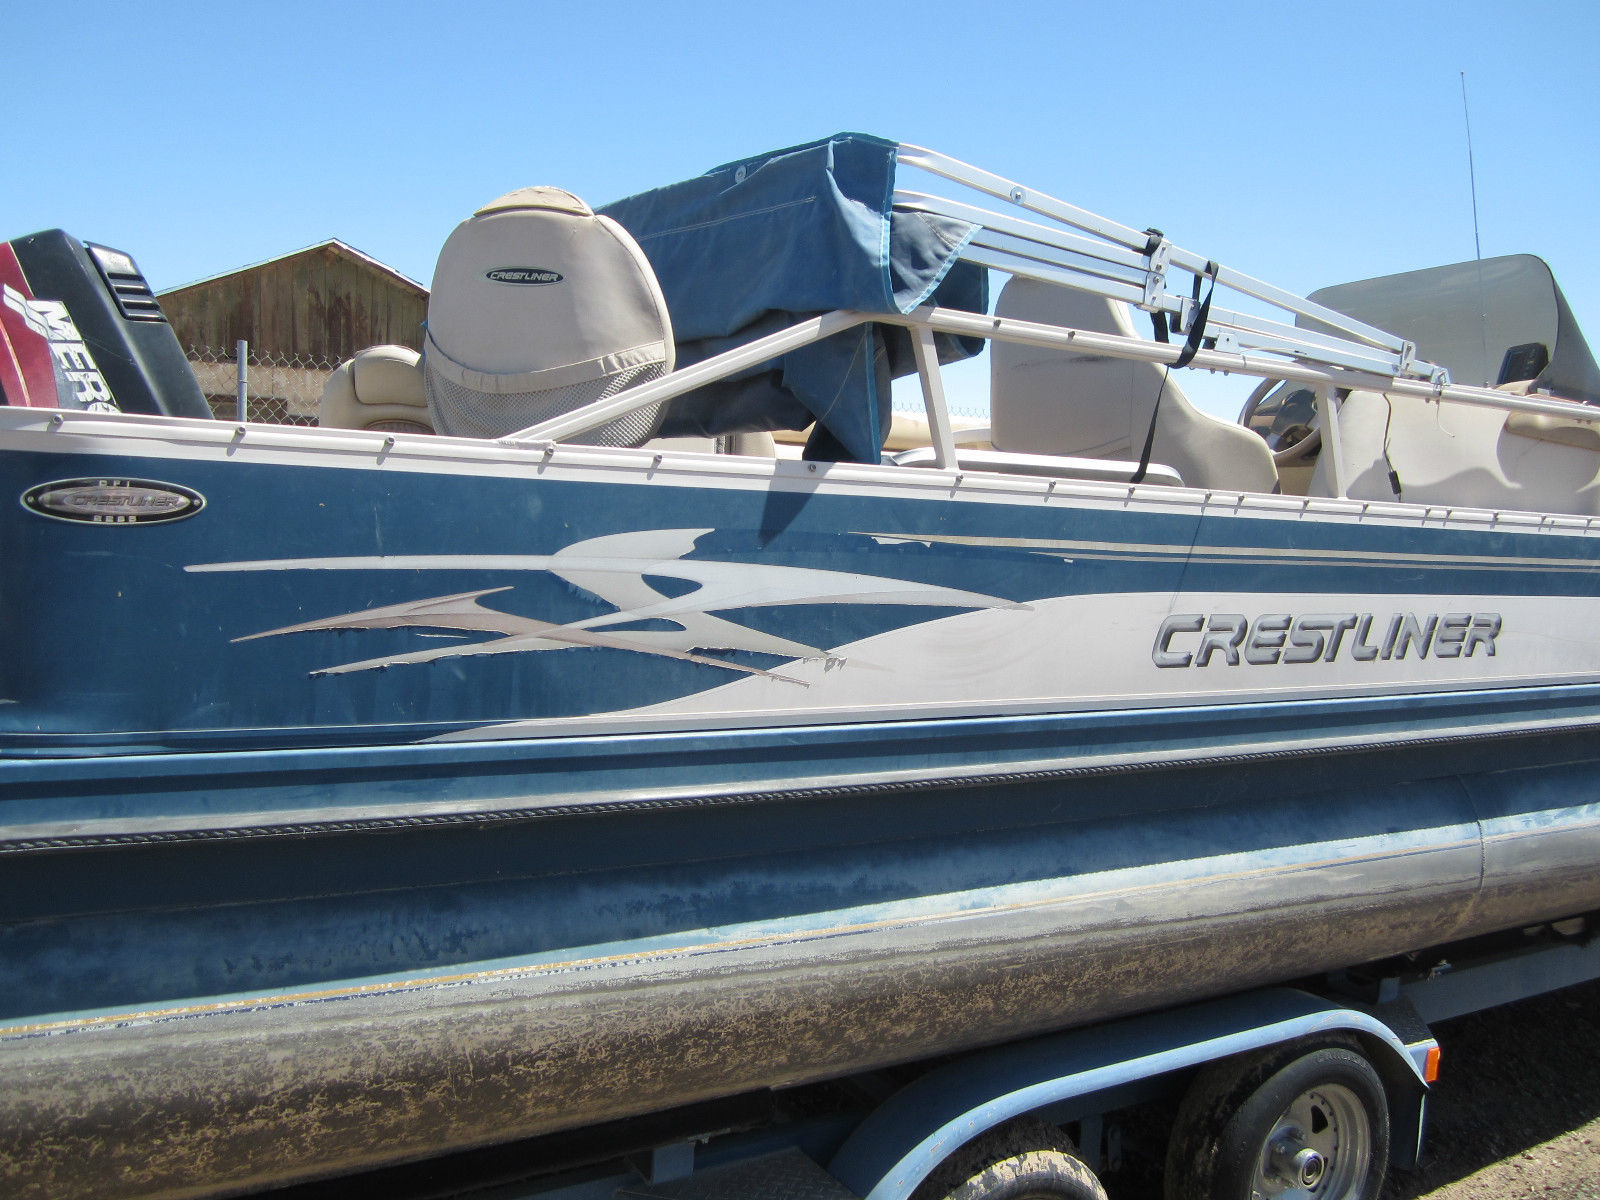 Crestliner 2002 for sale for $6,500 - Boats-from-USA.com